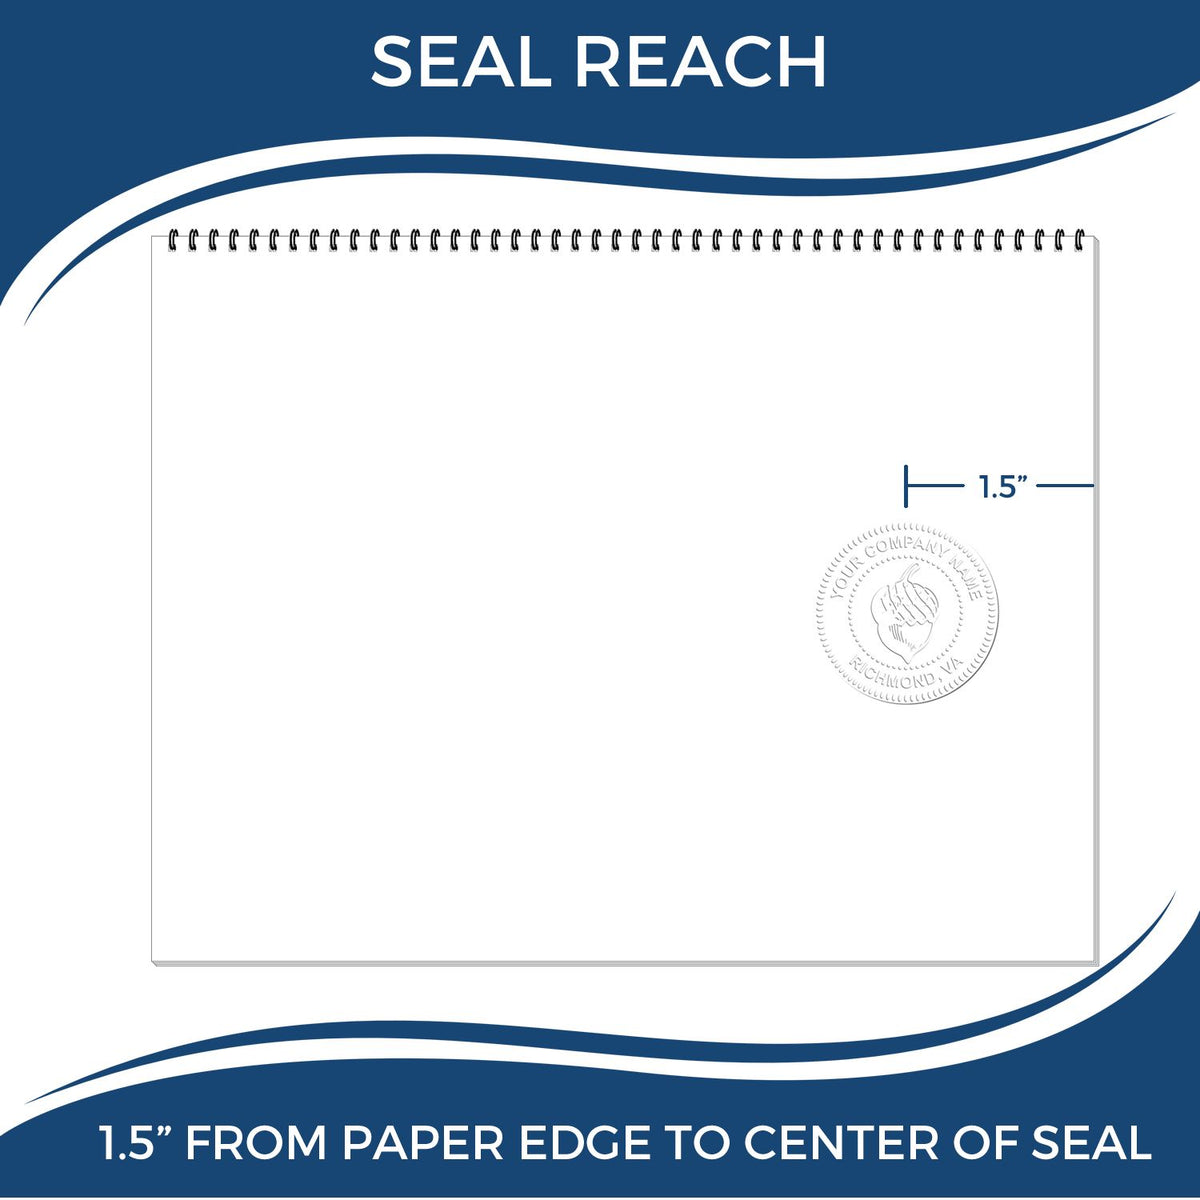 An infographic showing the seal reach which is represented by a ruler and a miniature seal image of the Hybrid Rhode Island Architect Seal